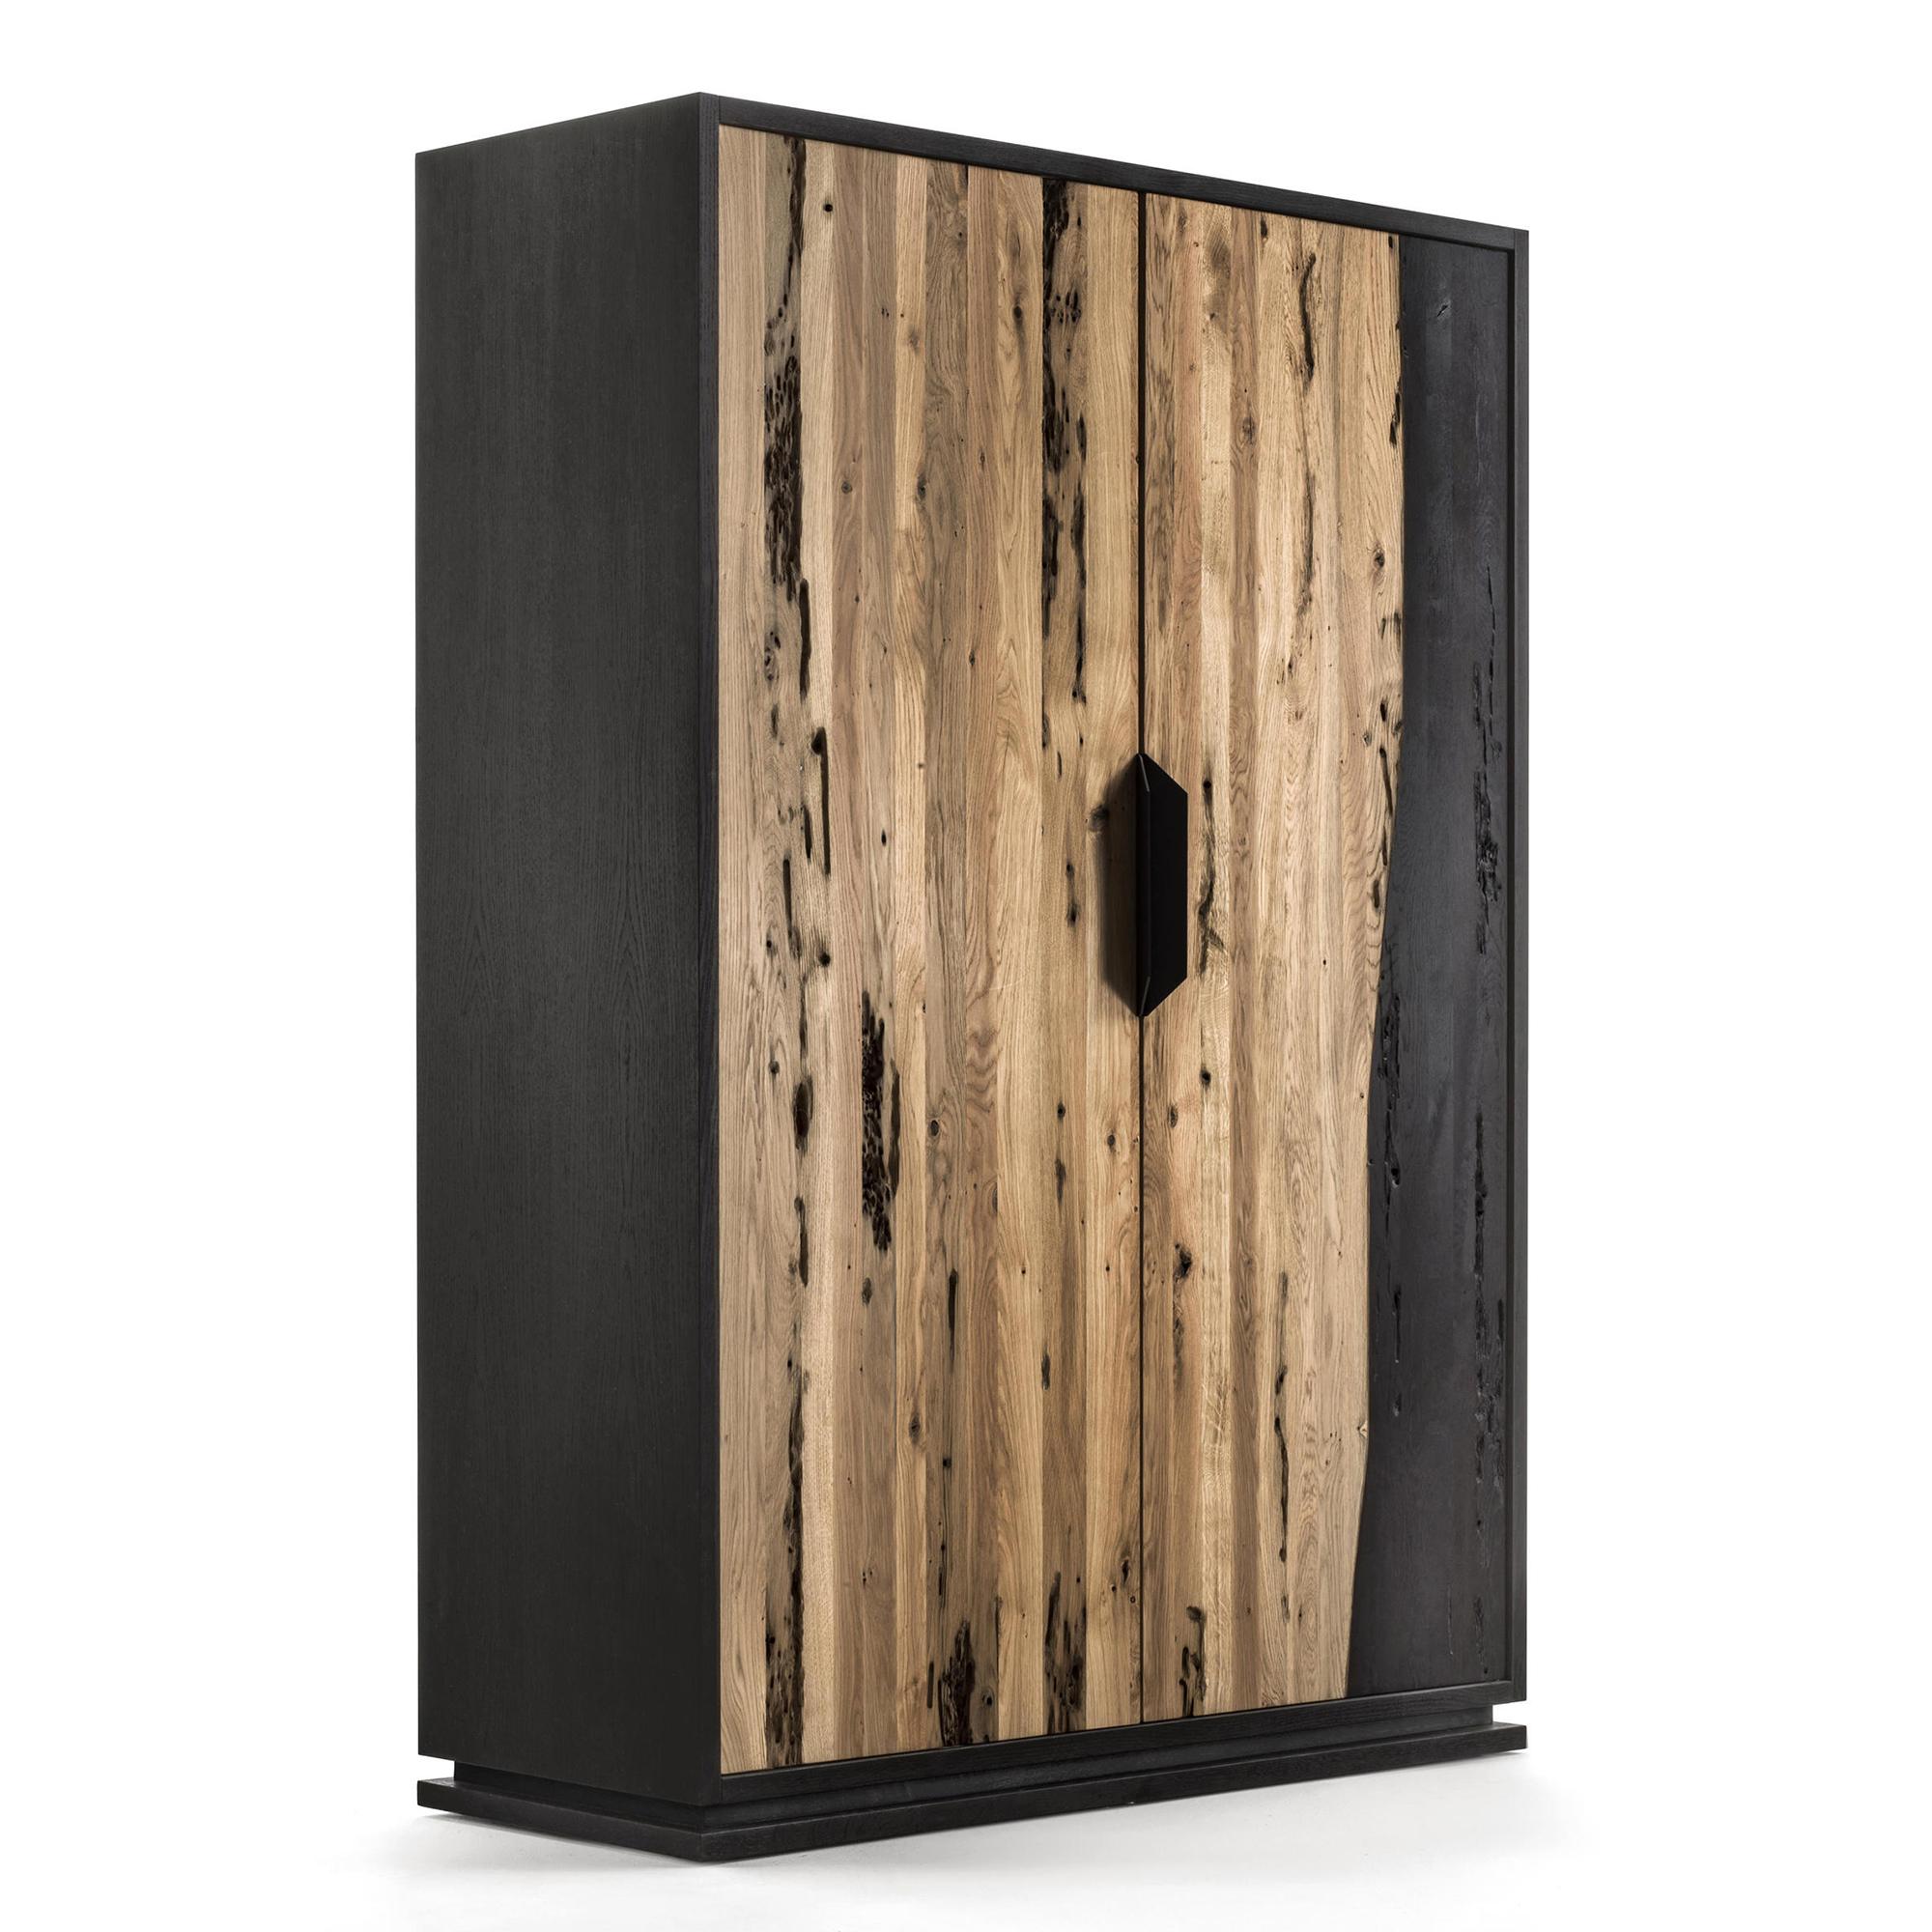 Wine bar natural and burnt oak raw with
all structure in natural solid oak raw wood and
with natural burnt solid oak raw wood. With 2
doors and with 4 drawers, 5 shelves and 14 bottles
range inside. Treated with wax with natural pine extracts.